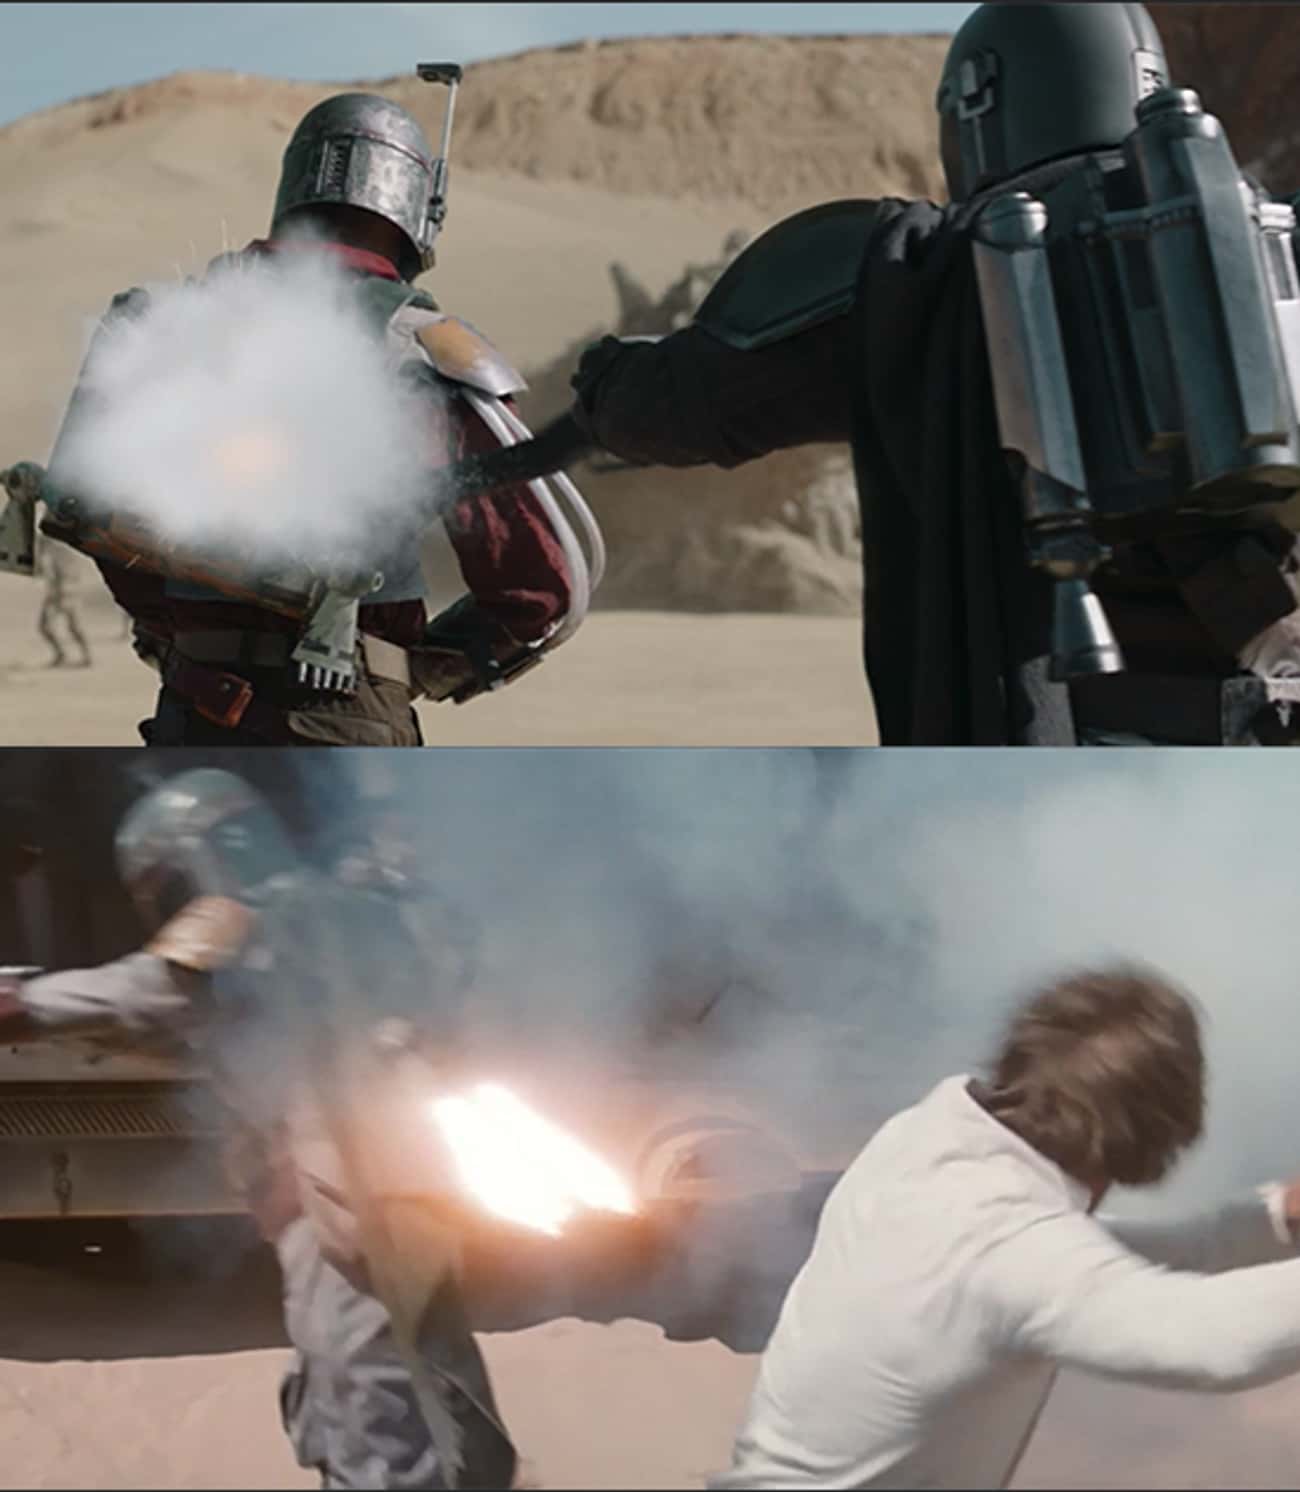 Boba Fett's Jetpack Was Also Set Off By Giving It Whack In 'Return Of The Jedi'